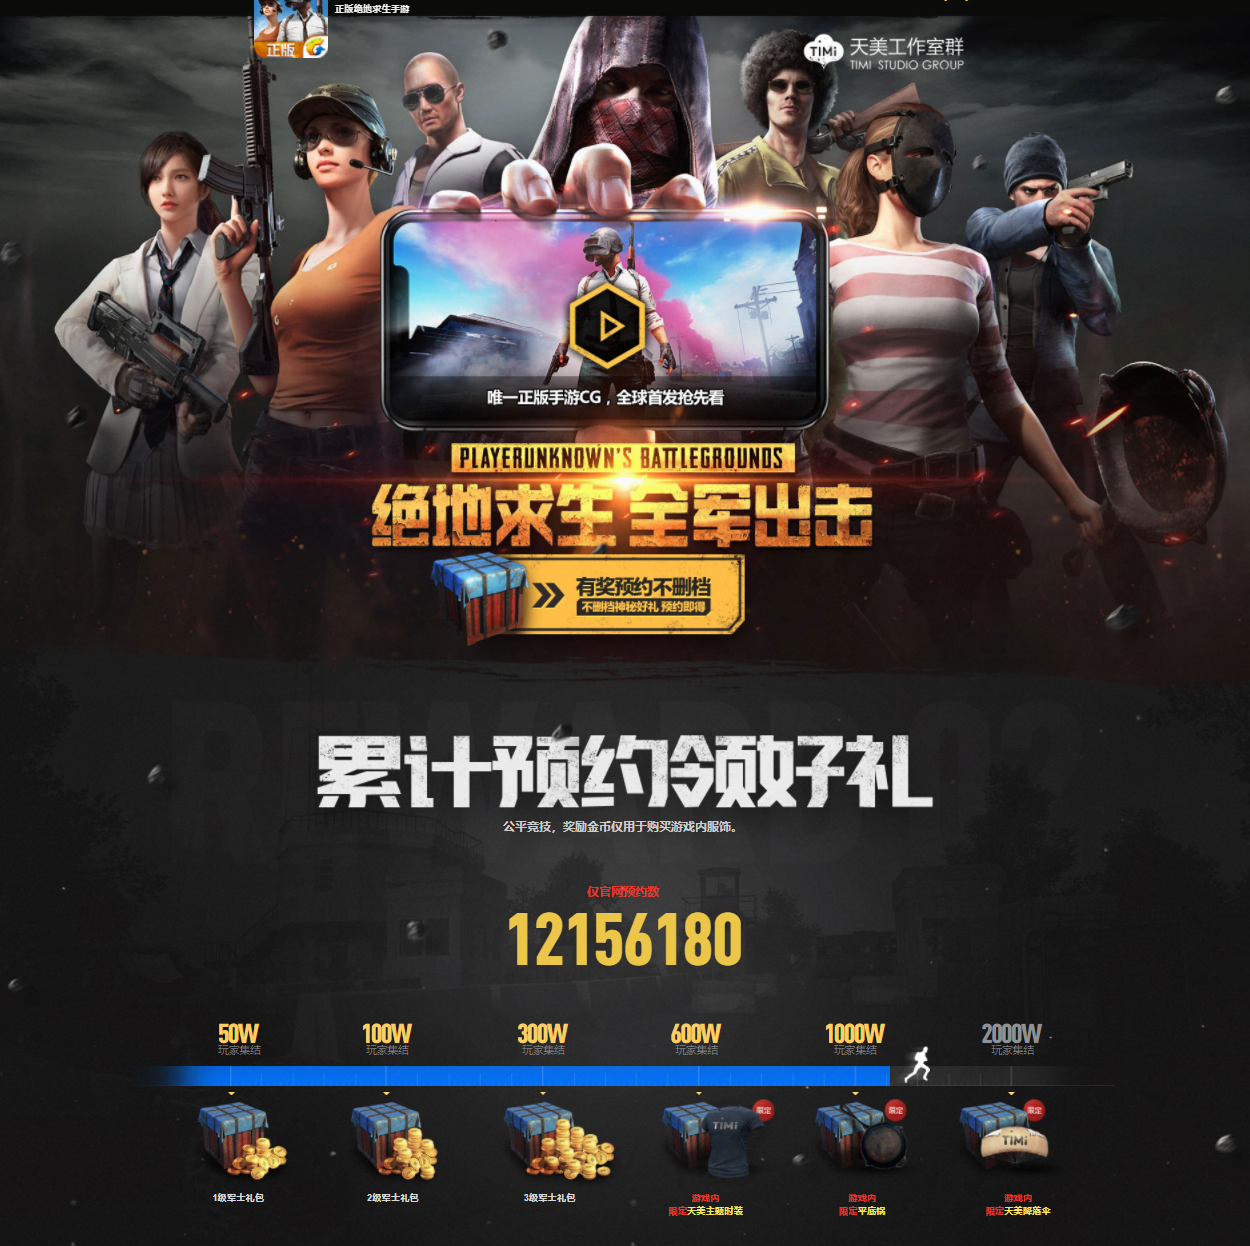 The official mobile version of PlayerUnknown's BattleGrounds is also being published by Tencent with over 12M players already pre-registering for the game.